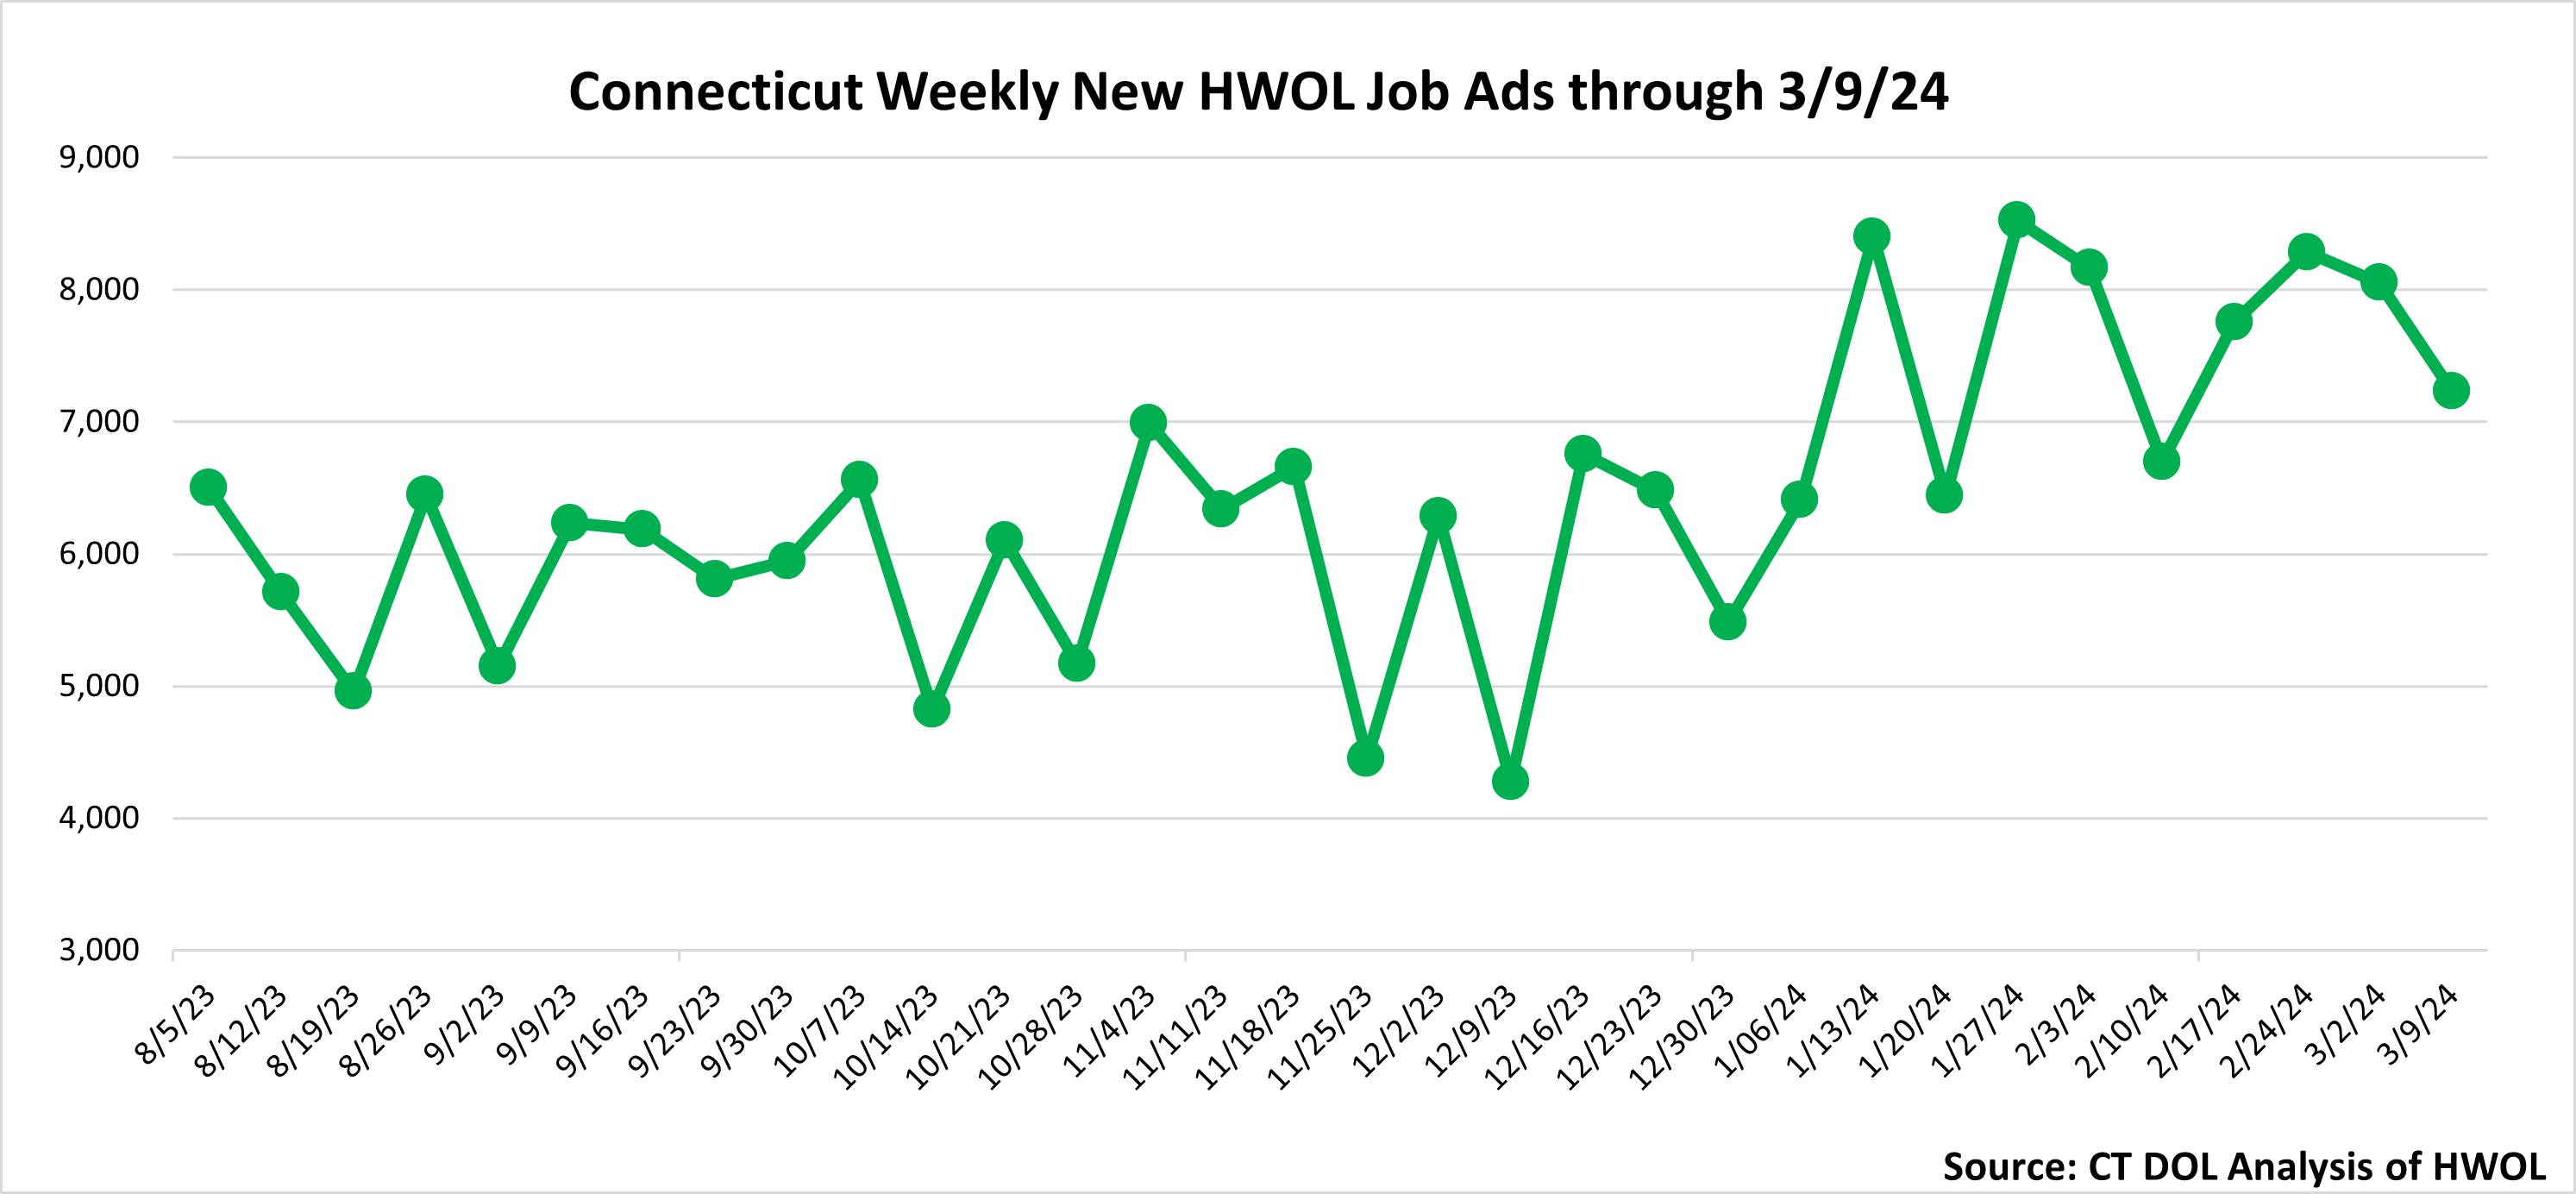 Connecticut Weekly Statewide New HWOL Job Ads through 3/09/24